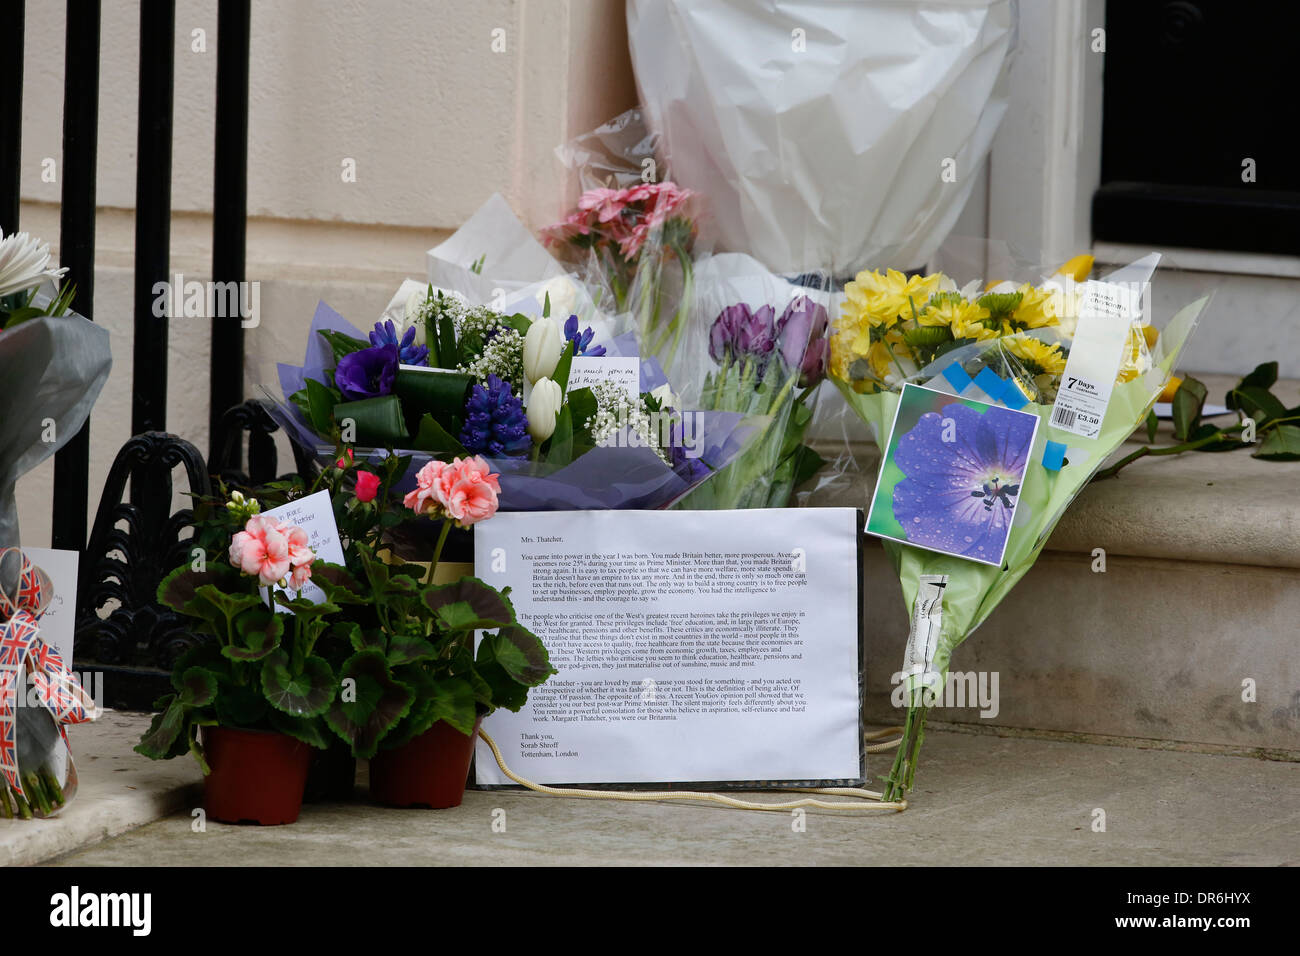 Sir Mark Thatcher, Baroness Thatcher's son pay respects to his mom when he gives a statement to the media outside her house on A Stock Photo